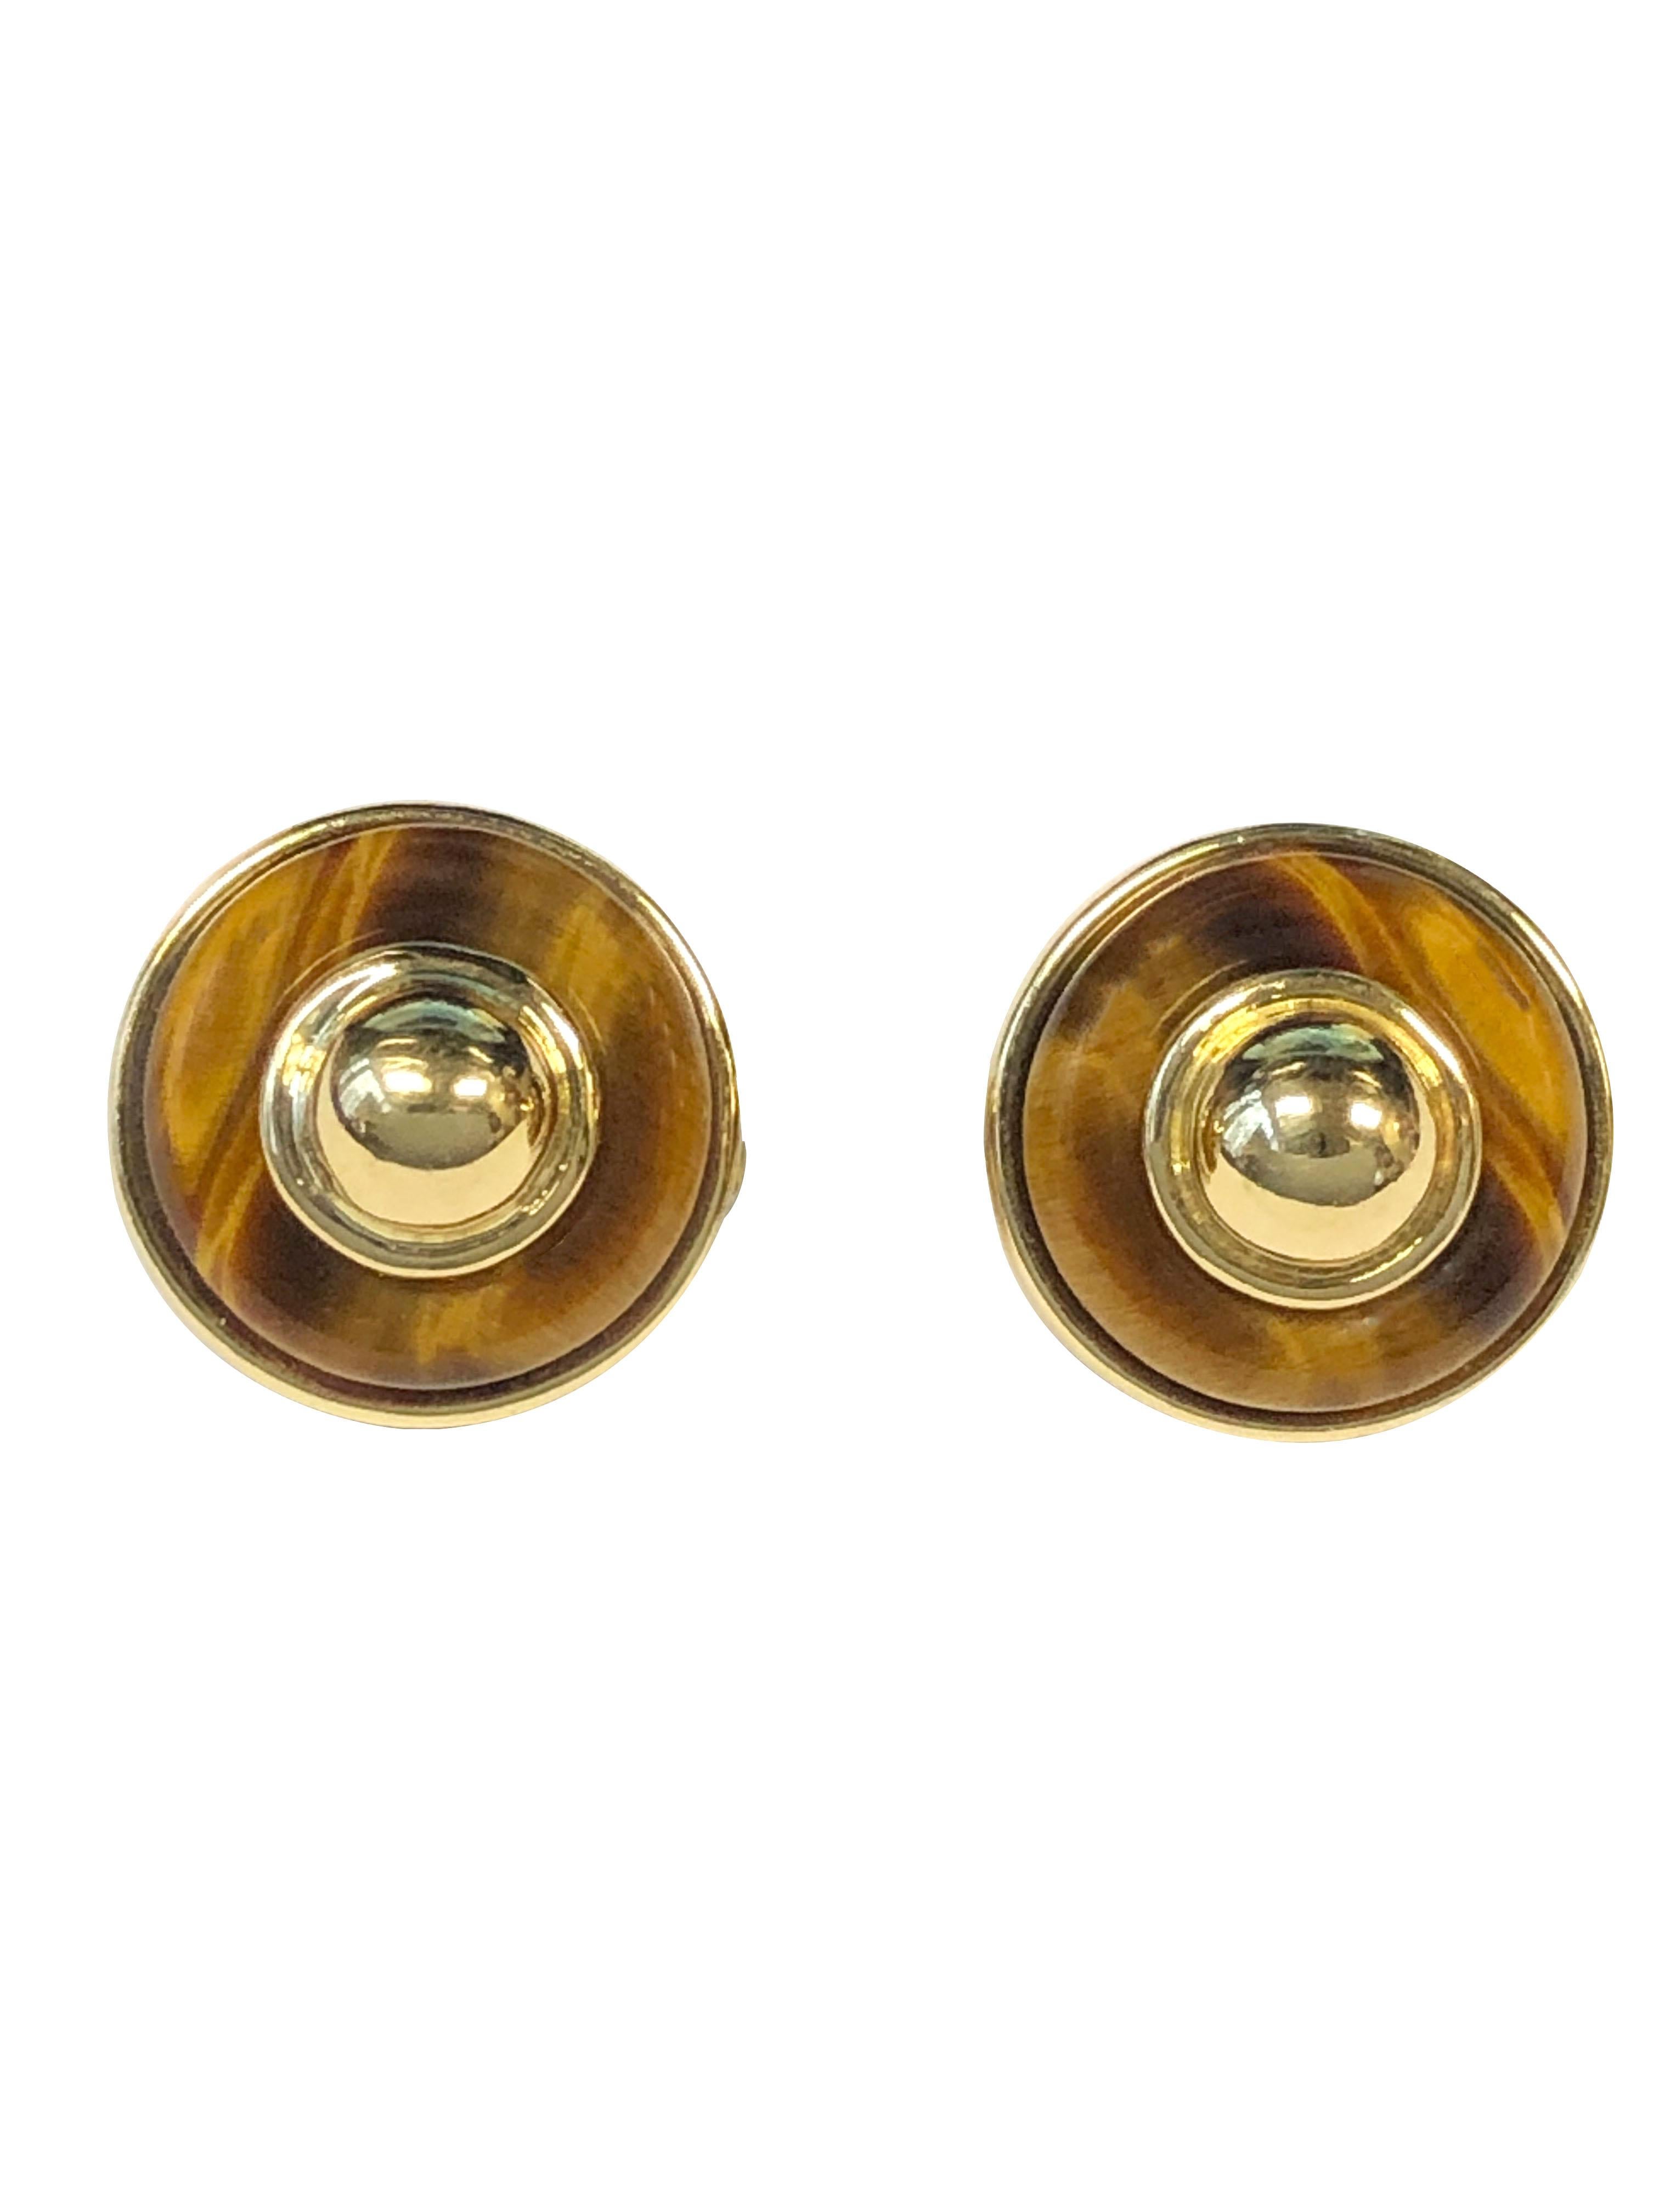 Circa 1980s Tiffany & Company 18k Yellow Gold and Tigers Eye Earrings, measuring 3/4 inch in diameter X 1/2 inch, Clip backs to which a post can be easily added if desired.  Comes in the original Presentation box.